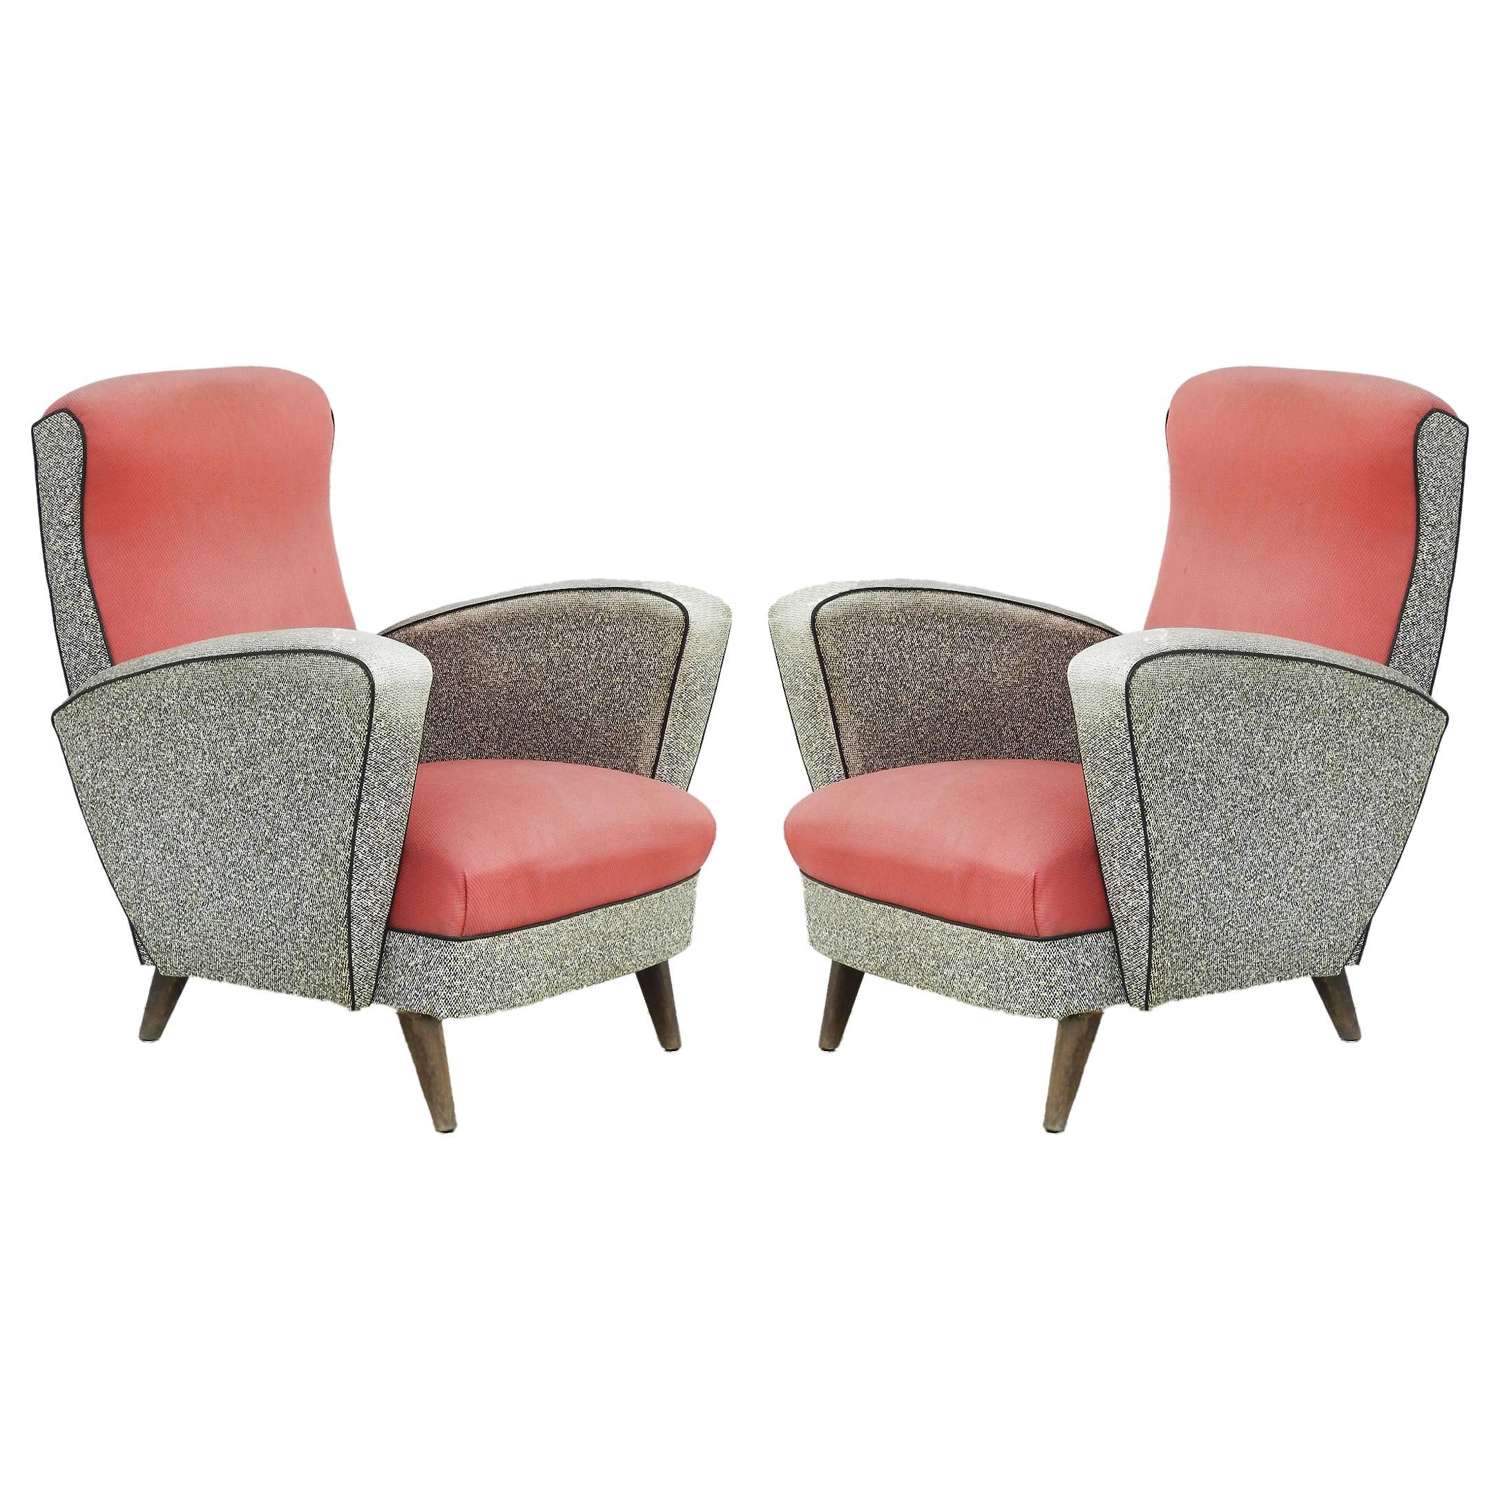 Pair of Midcentury Lounge Chairs Original Condition French Armchairs